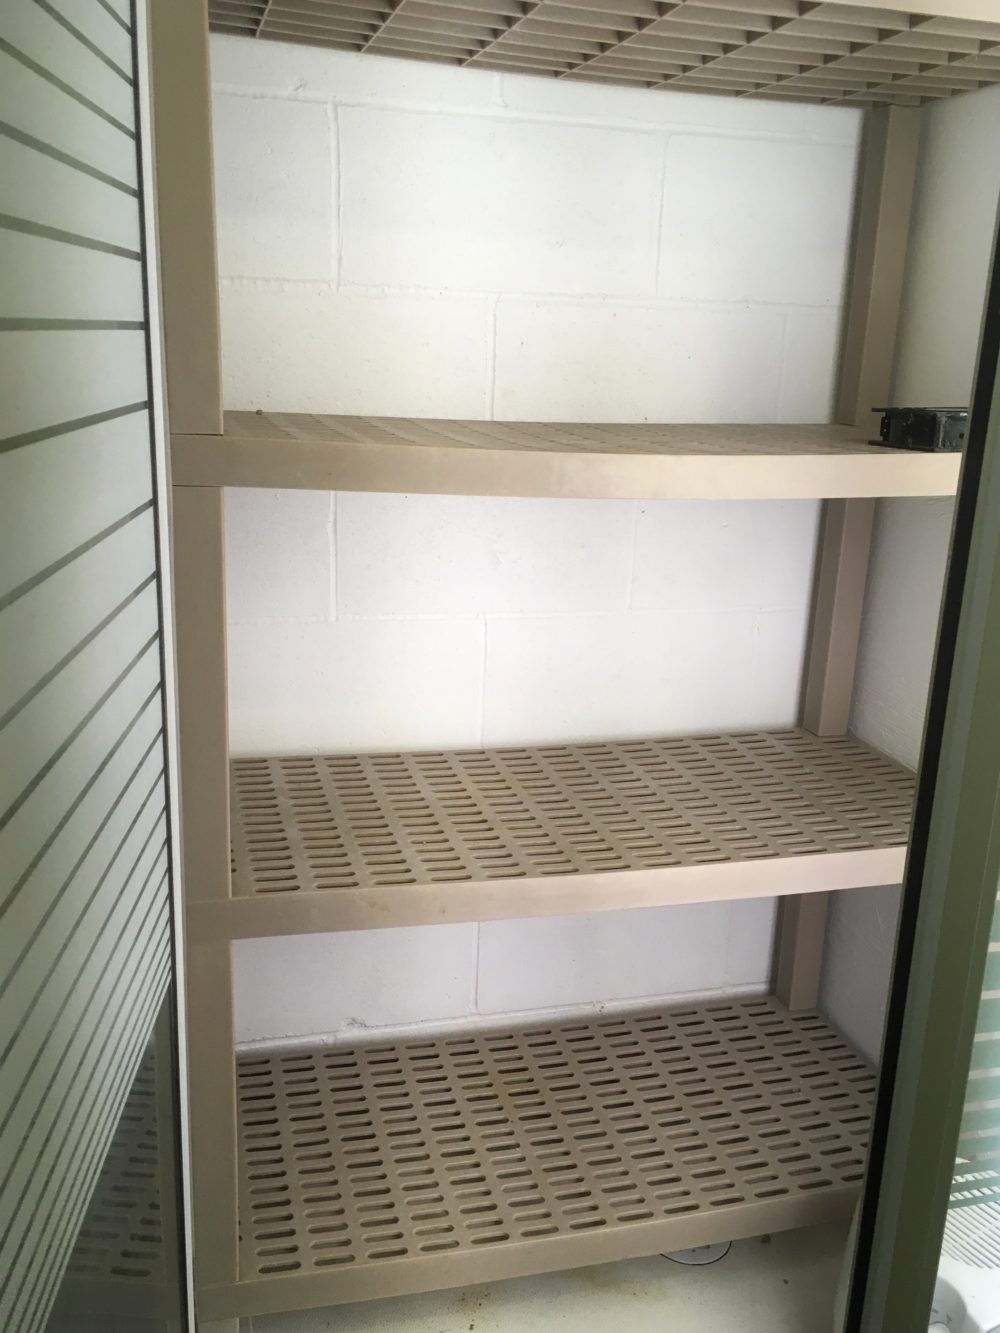 This plastic shelving unit just happened to fit perfectly! Perforations allow drainage and air circulation.